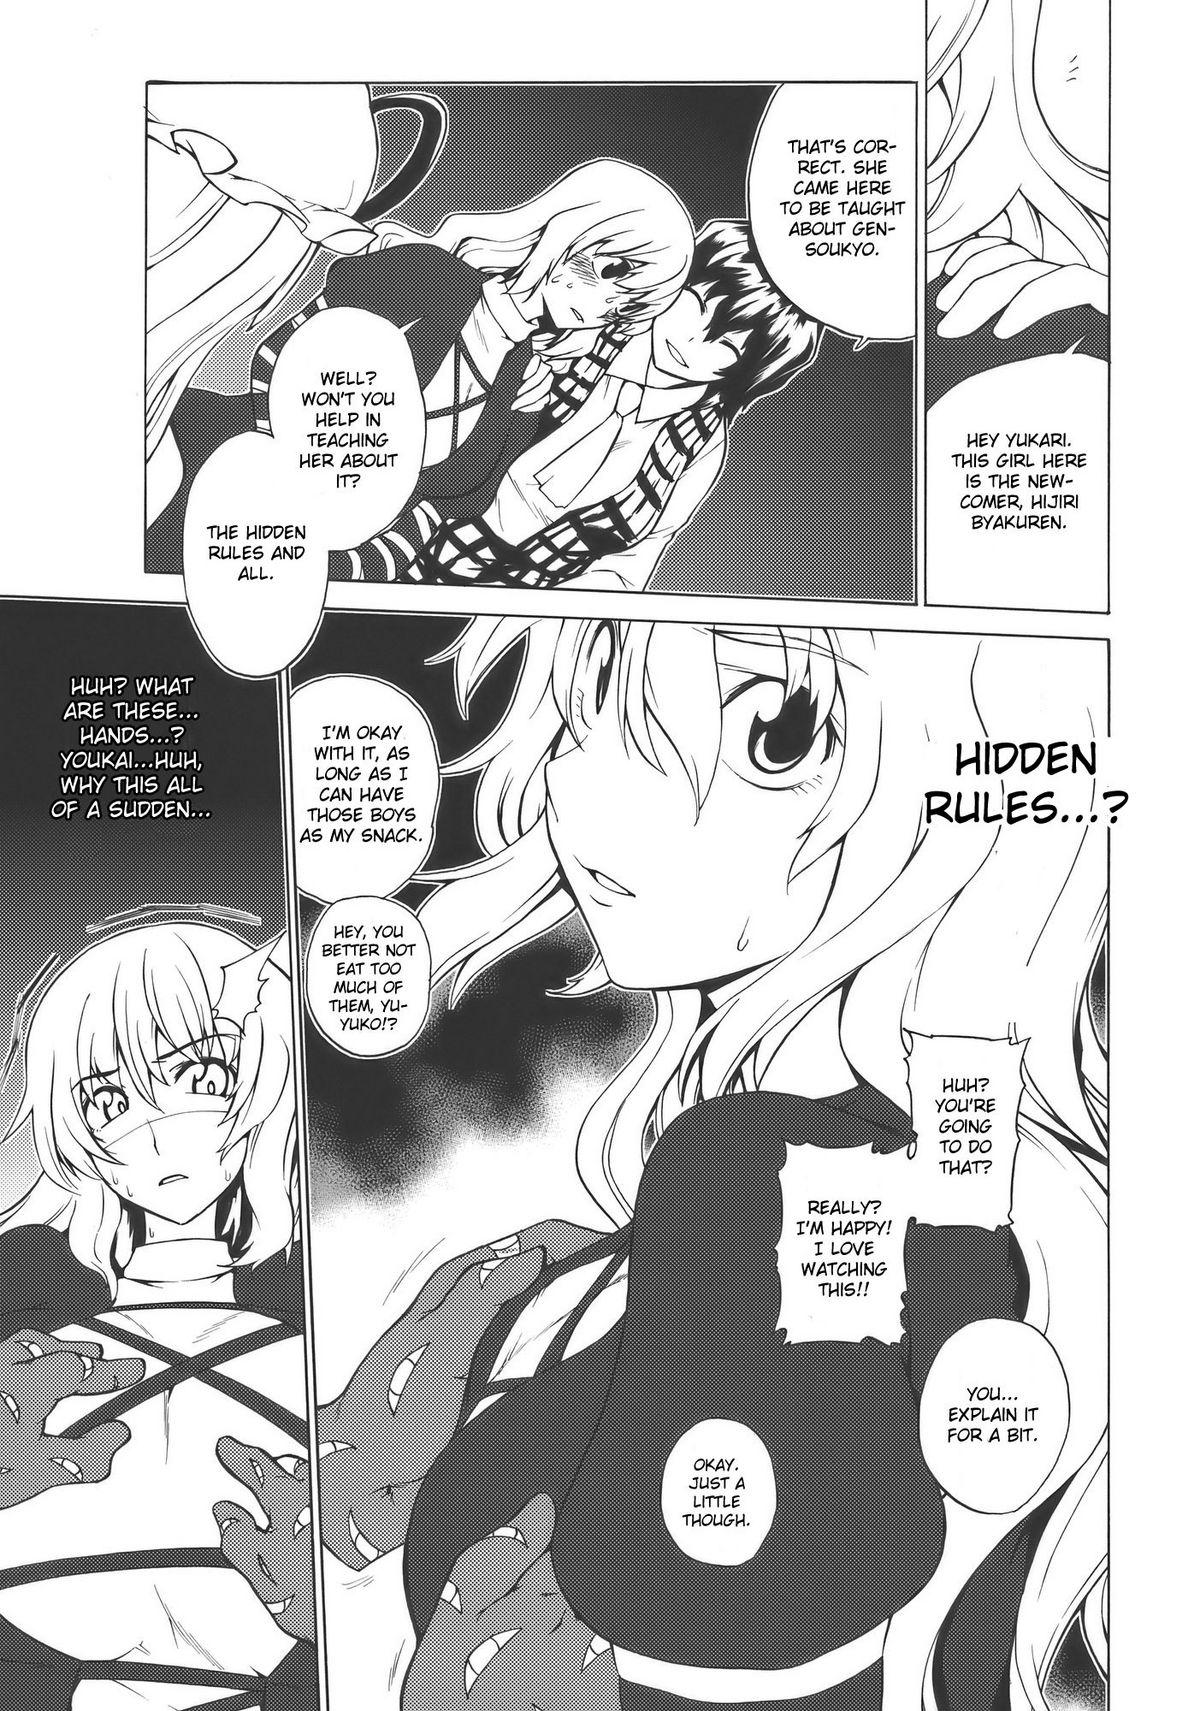 Bucetuda Playing Gensoukyou Now - Touhou project Linda - Page 9